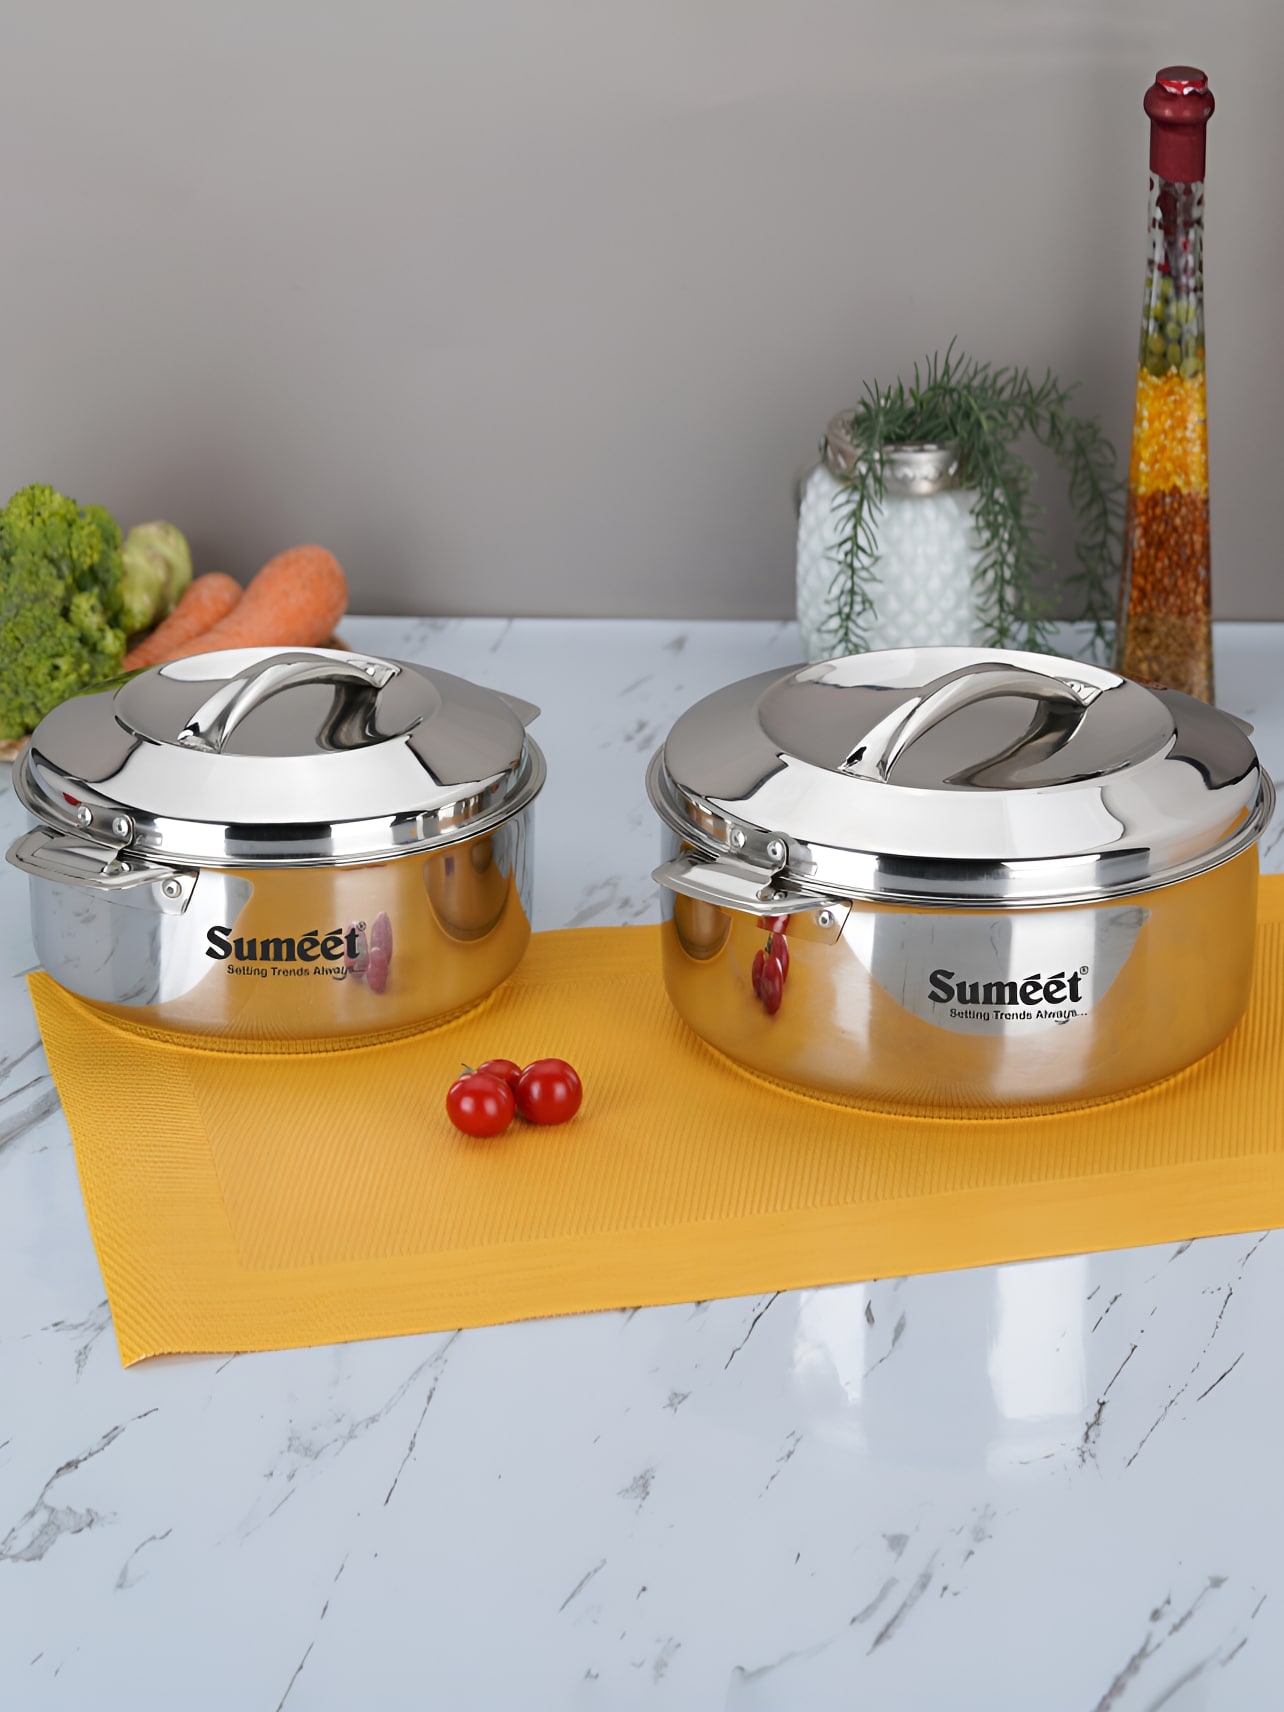 Sumeet Stainless Steel Double Wall Insulated Serving Casserole - 1.6 L